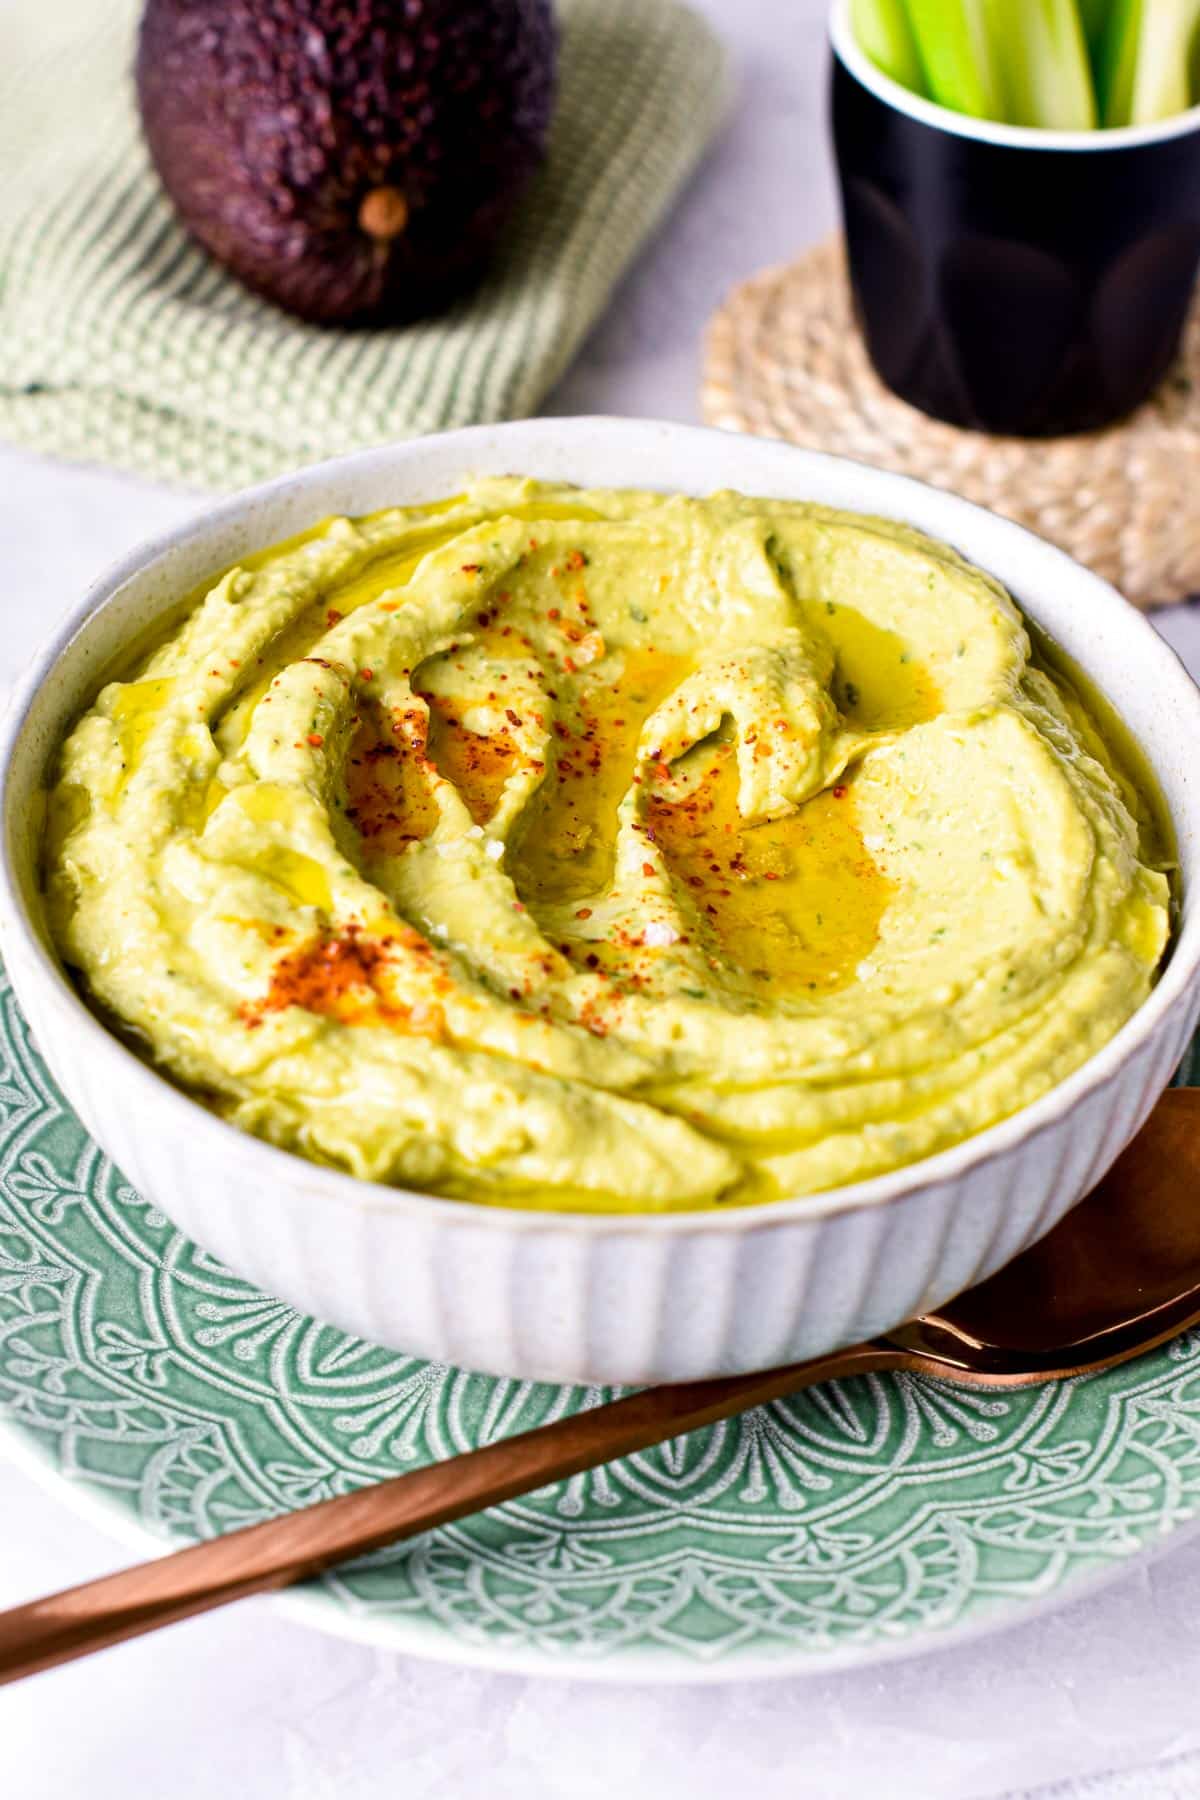 This Avocado Hummus is a creamy green hummus packed with avocado for a boost of healthy fats and ultra creamy texture. Plus, this easy hummus recipe is also vegan, gluten-free and dairy-free so everyone can dip in.